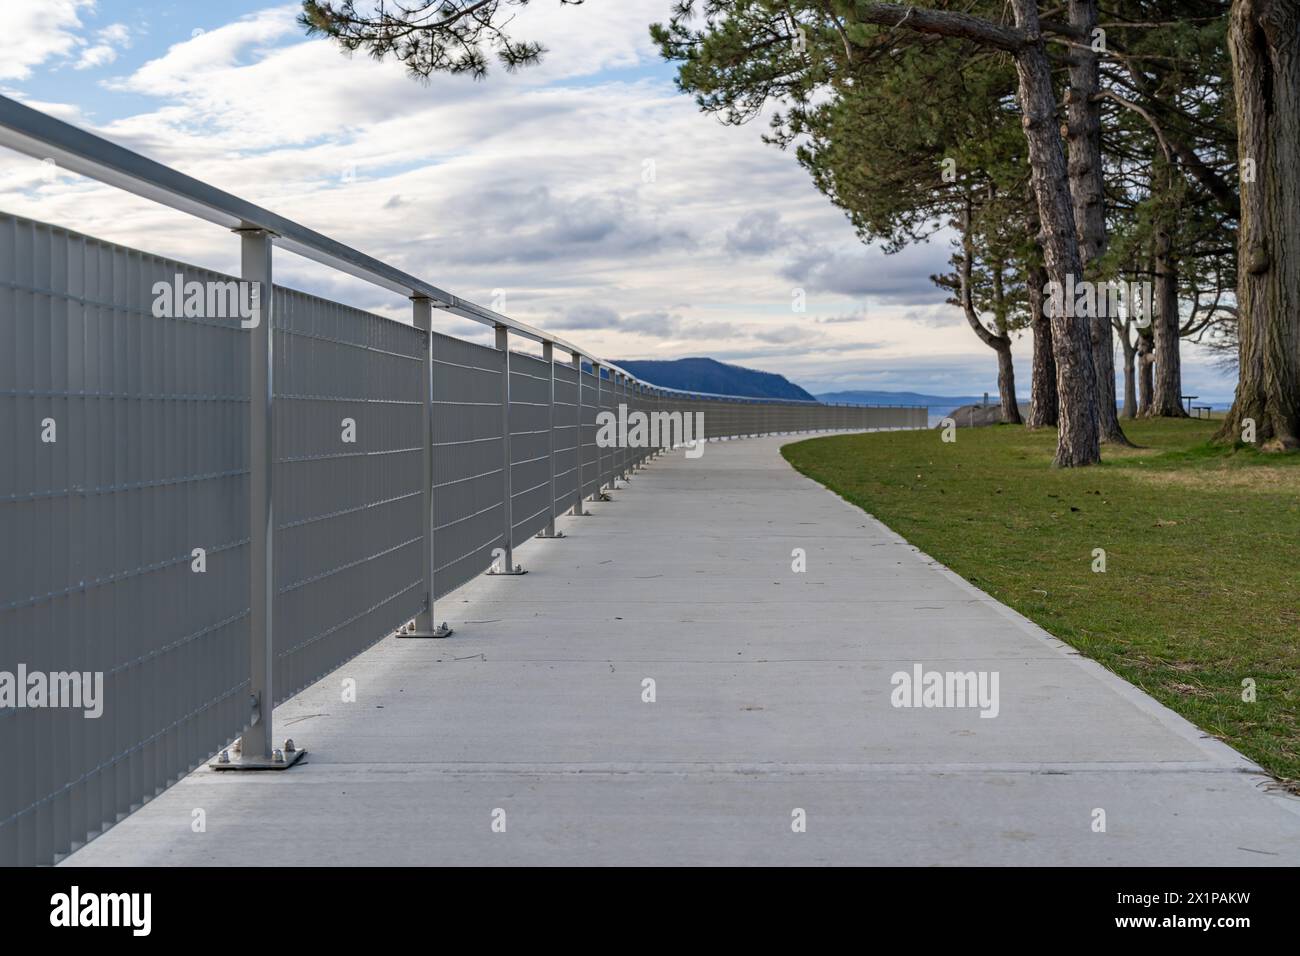 Example of a stainless steel railing along a concrete sidewalk, at the top of retaining wall. Stock Photo